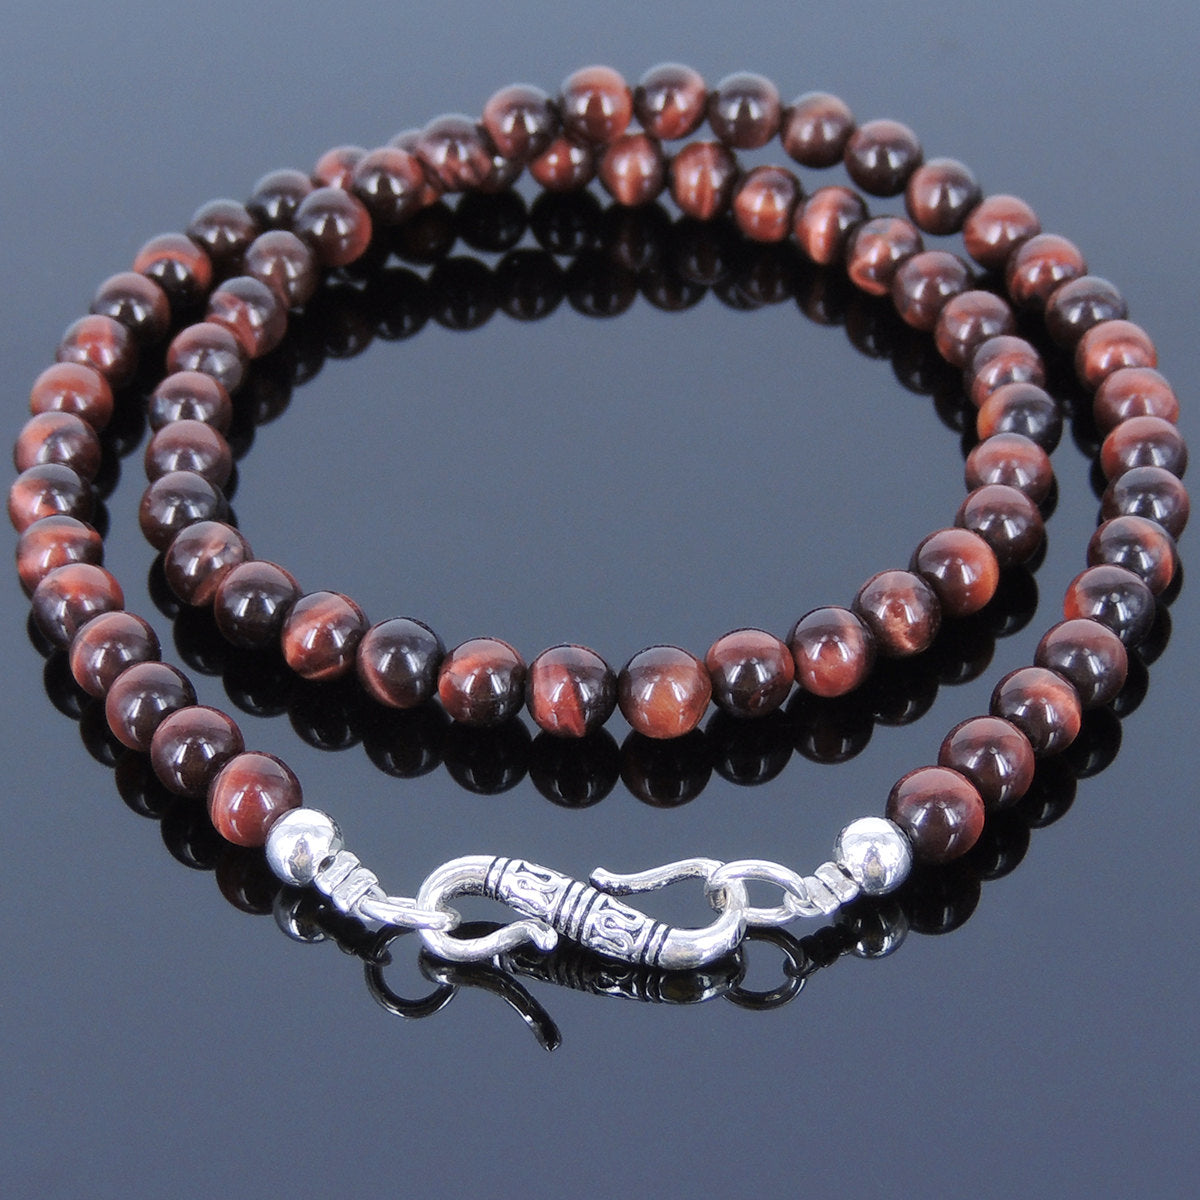 6mm Red Tiger Eye Healing Gemstone Necklace with S925 Sterling Silver Spacers & Clasp - Handmade by Gem & Silver NK036